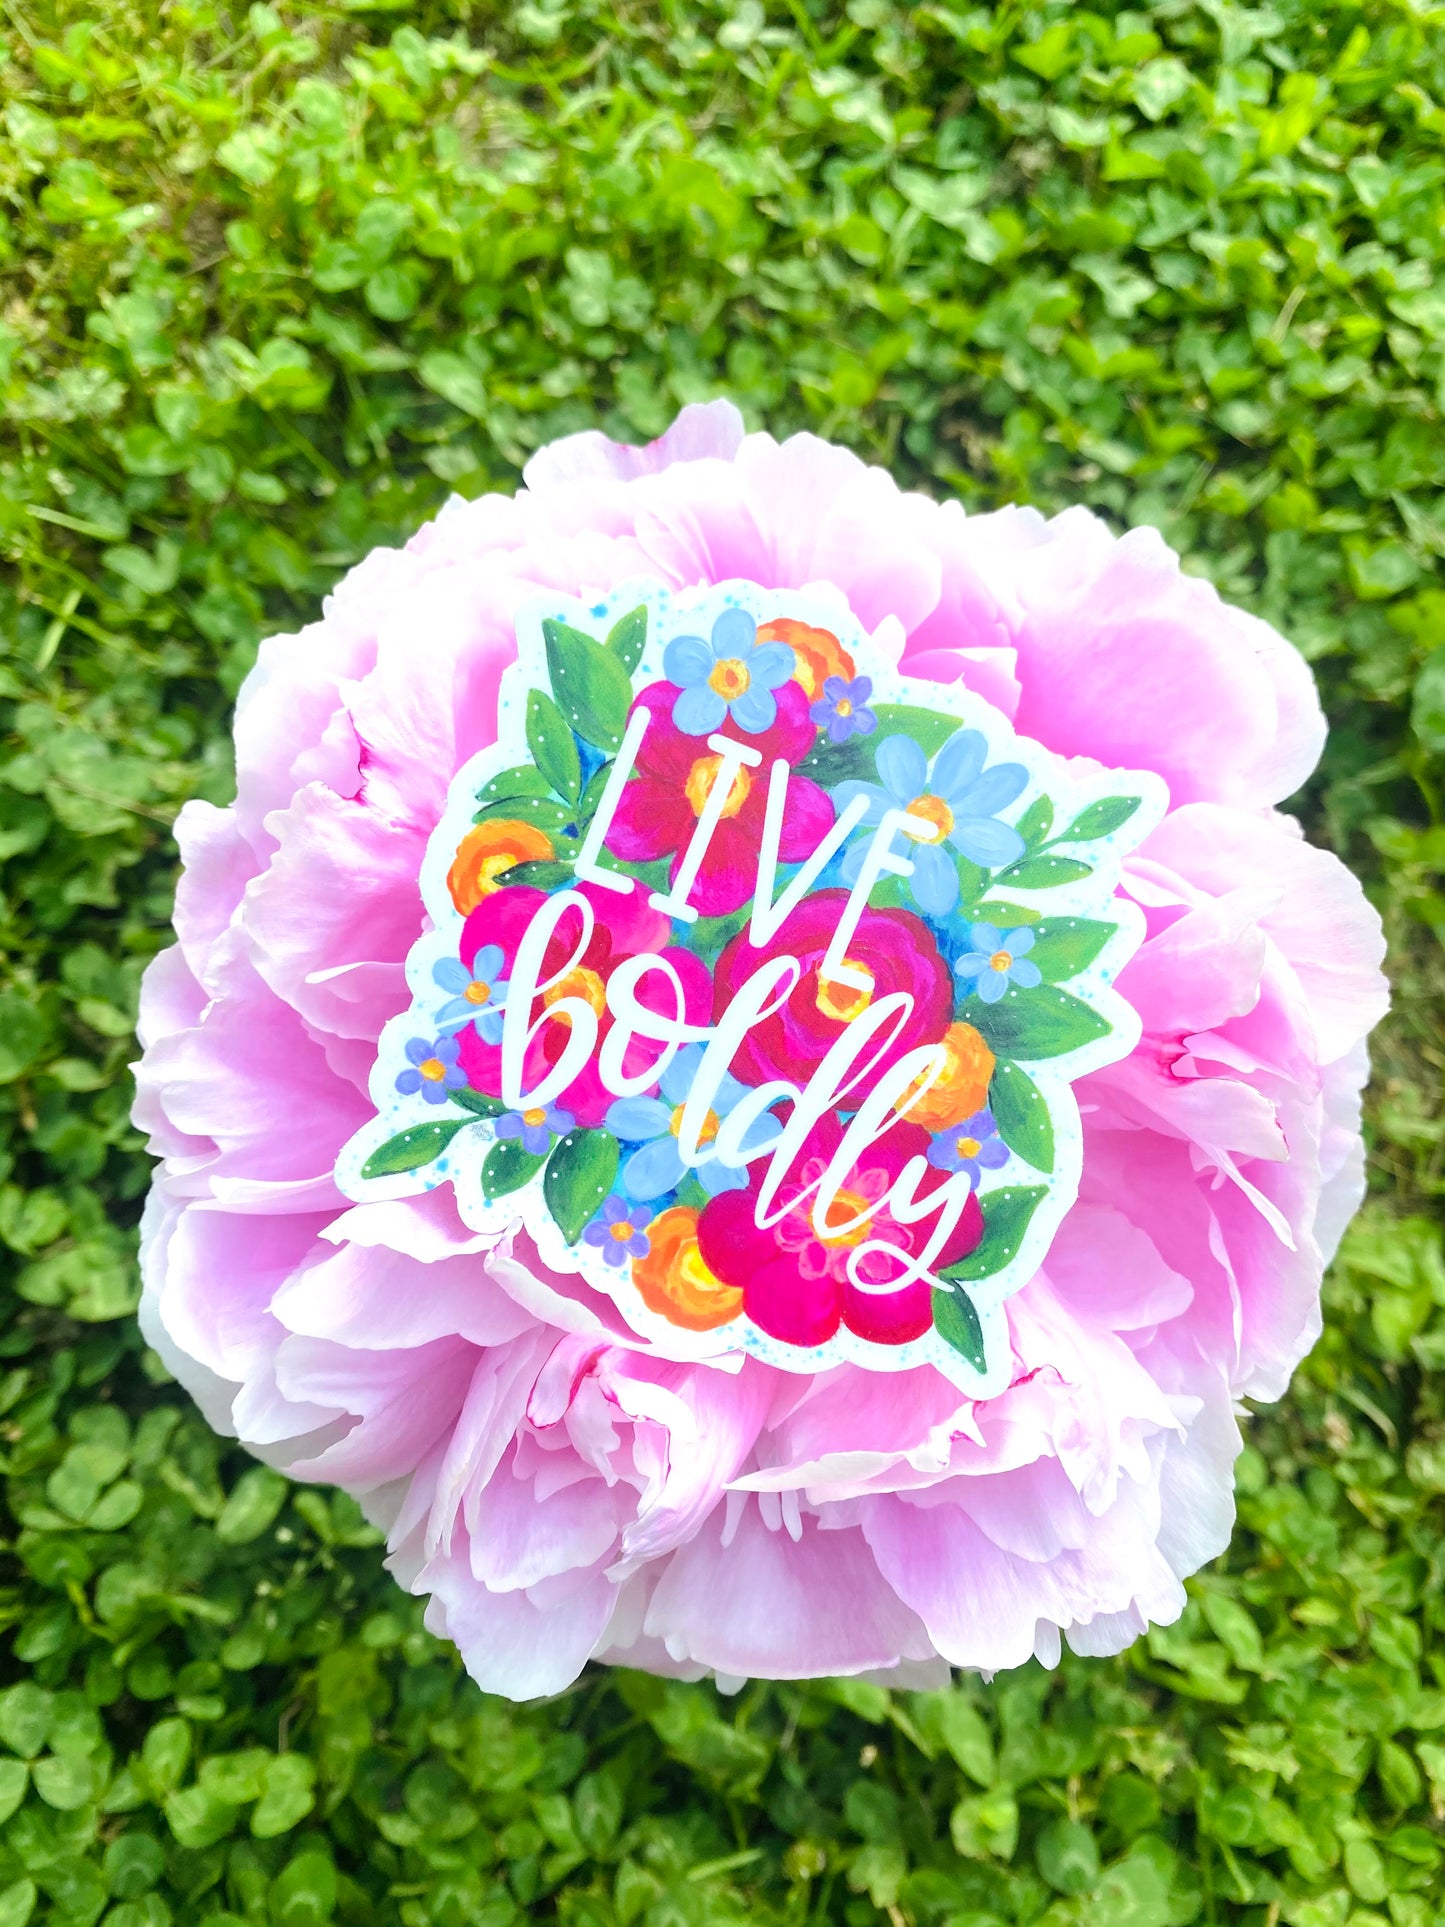 Live Boldly Floral Vinyl Sticker - May 2021 Sticker of the Month